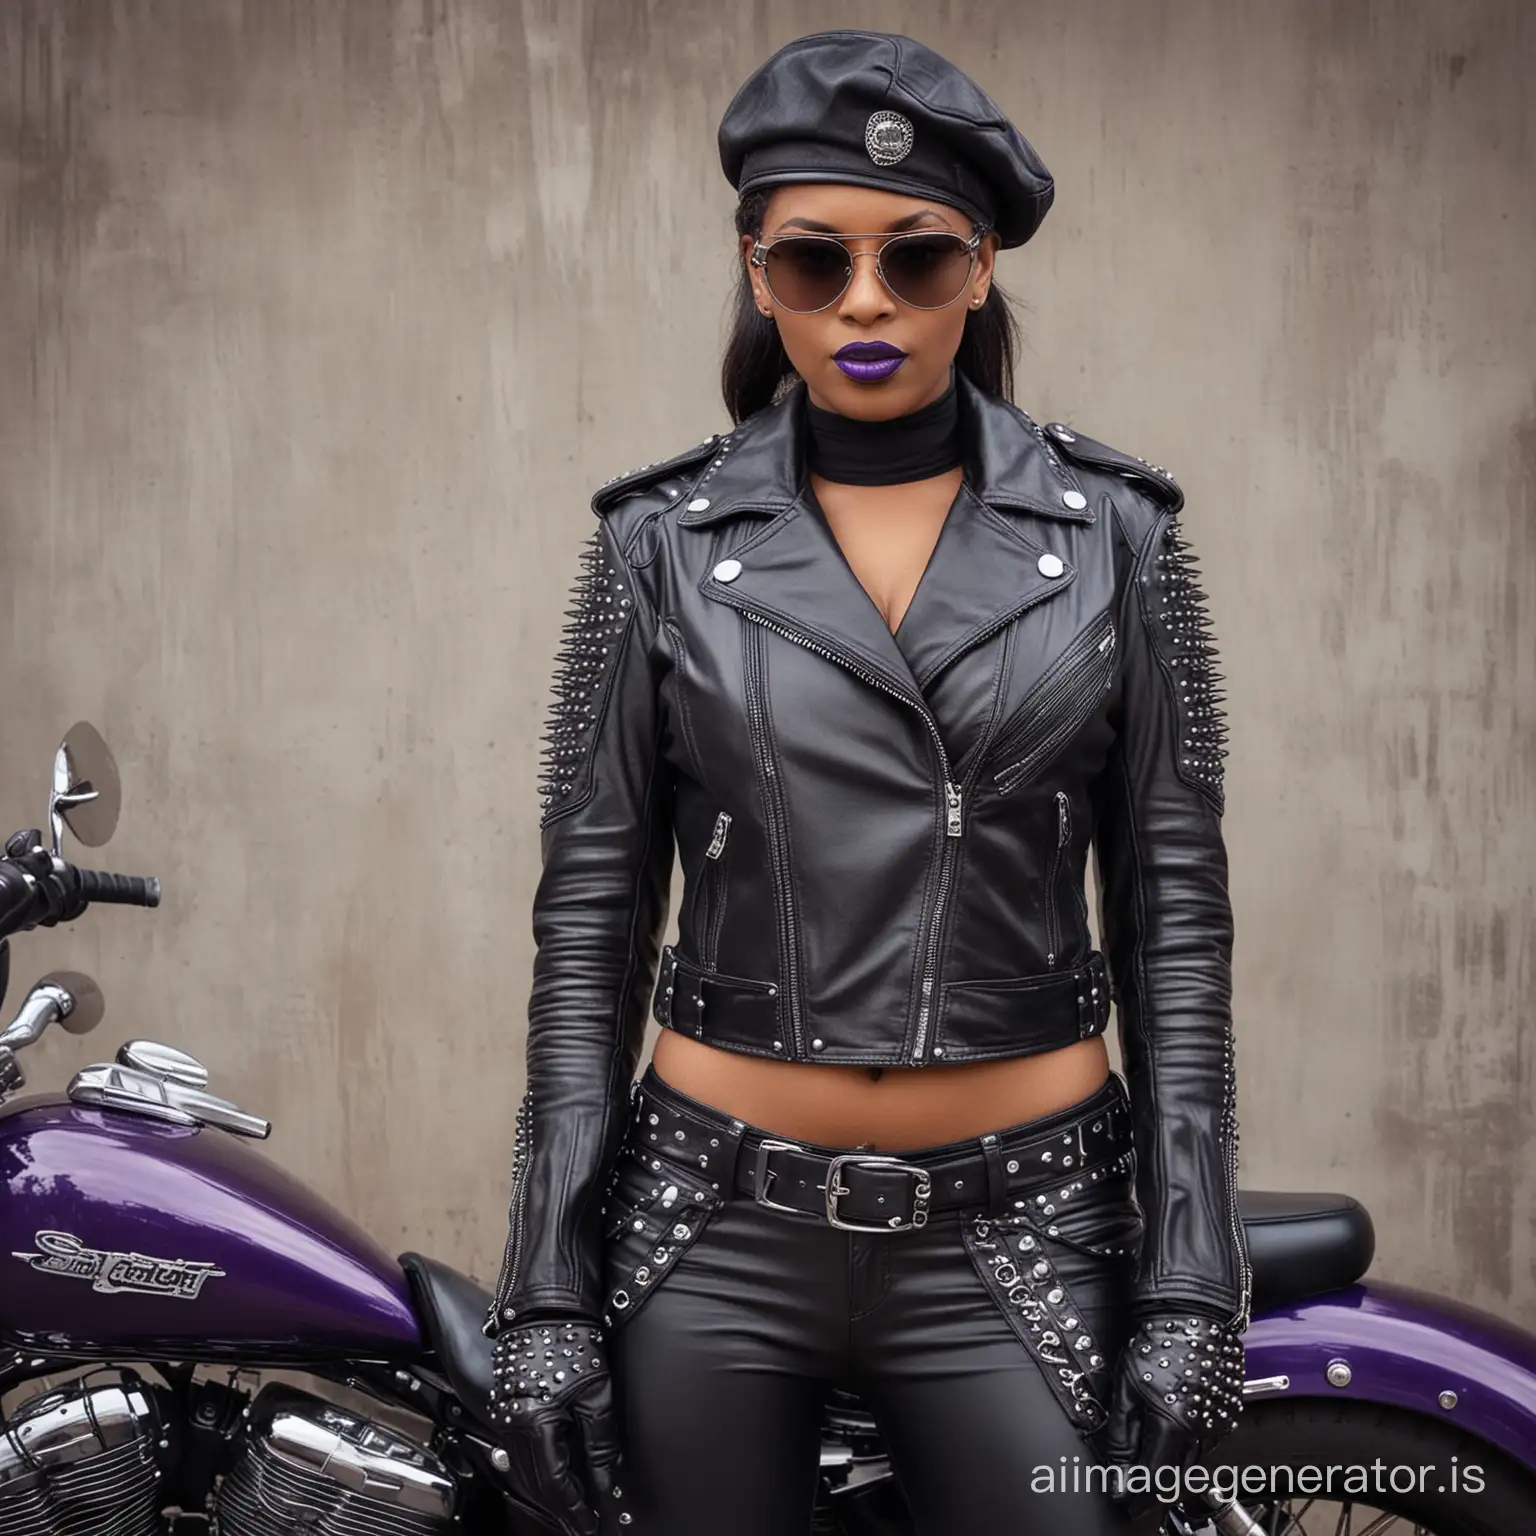 sadistic ebony biker woman purple lipstick, motorcycle jacket with spikes, leather chaps, leather masters cap, leather gloves and sunglasses, high heel boots, looking at camera